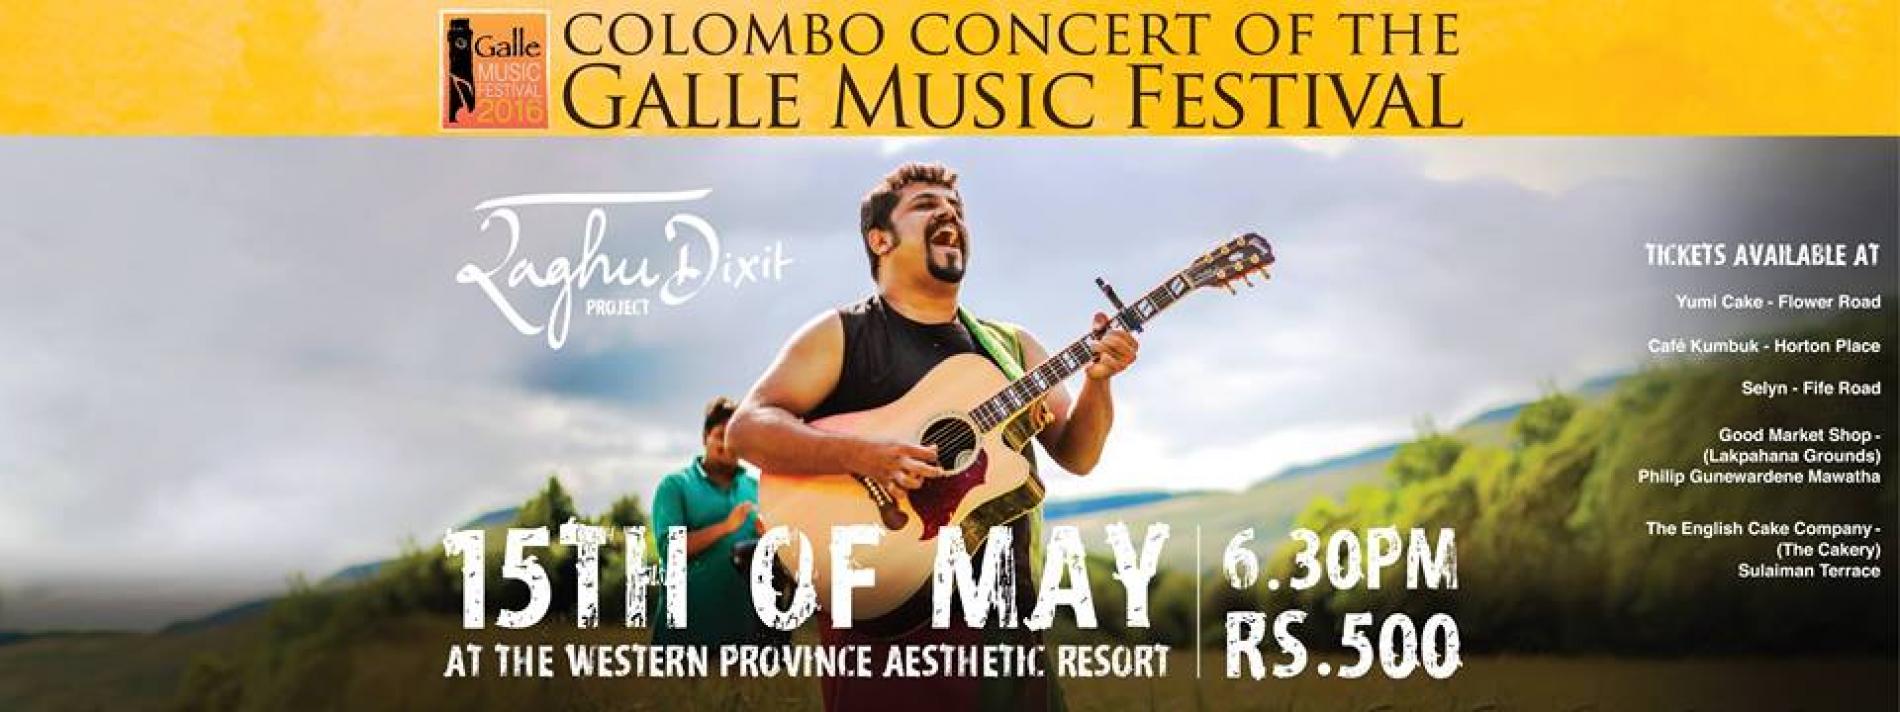 Colombo Concert of the Galle Music Festival